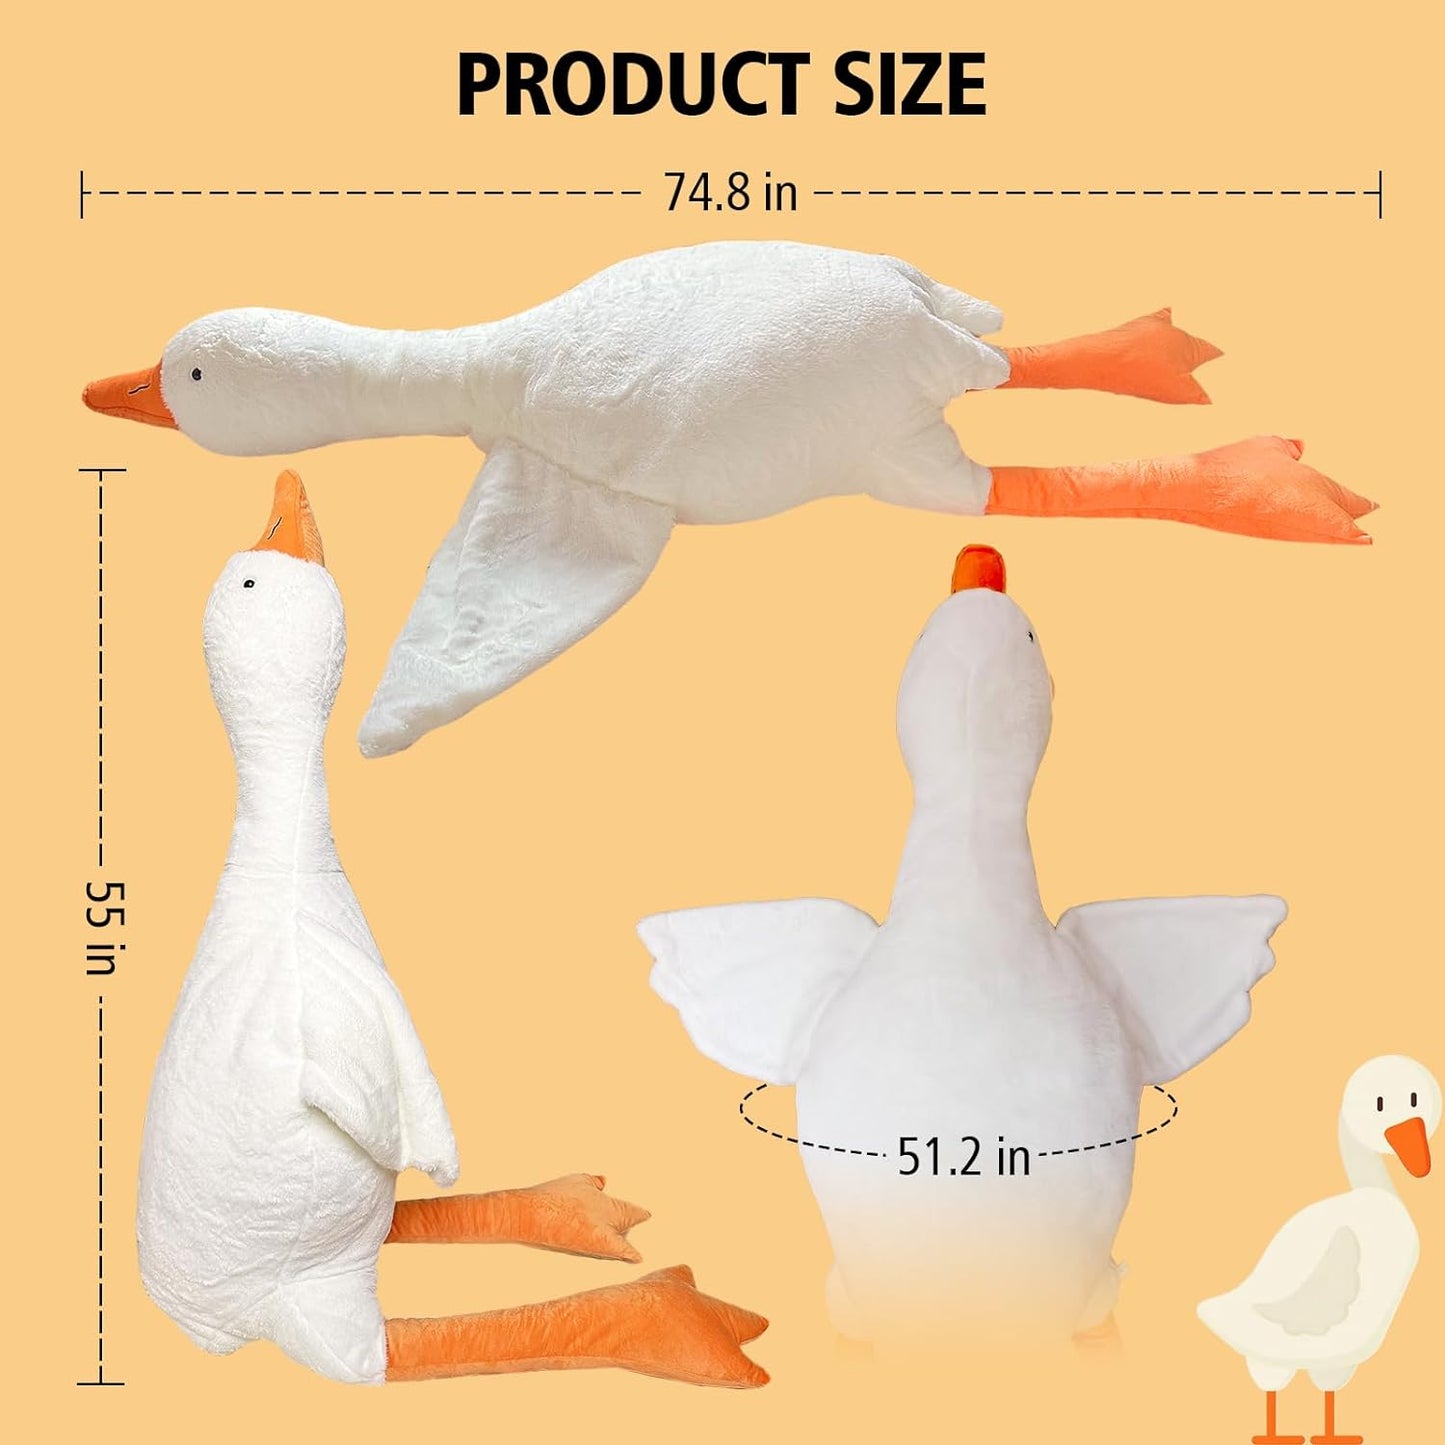 unibouti Giant Stuffed Animal, 6.2 Feet/ 75 Inches Huge Goose Plush Toy for Kids/Girlfriend, Cute Duck Weighted Stuffed Plush